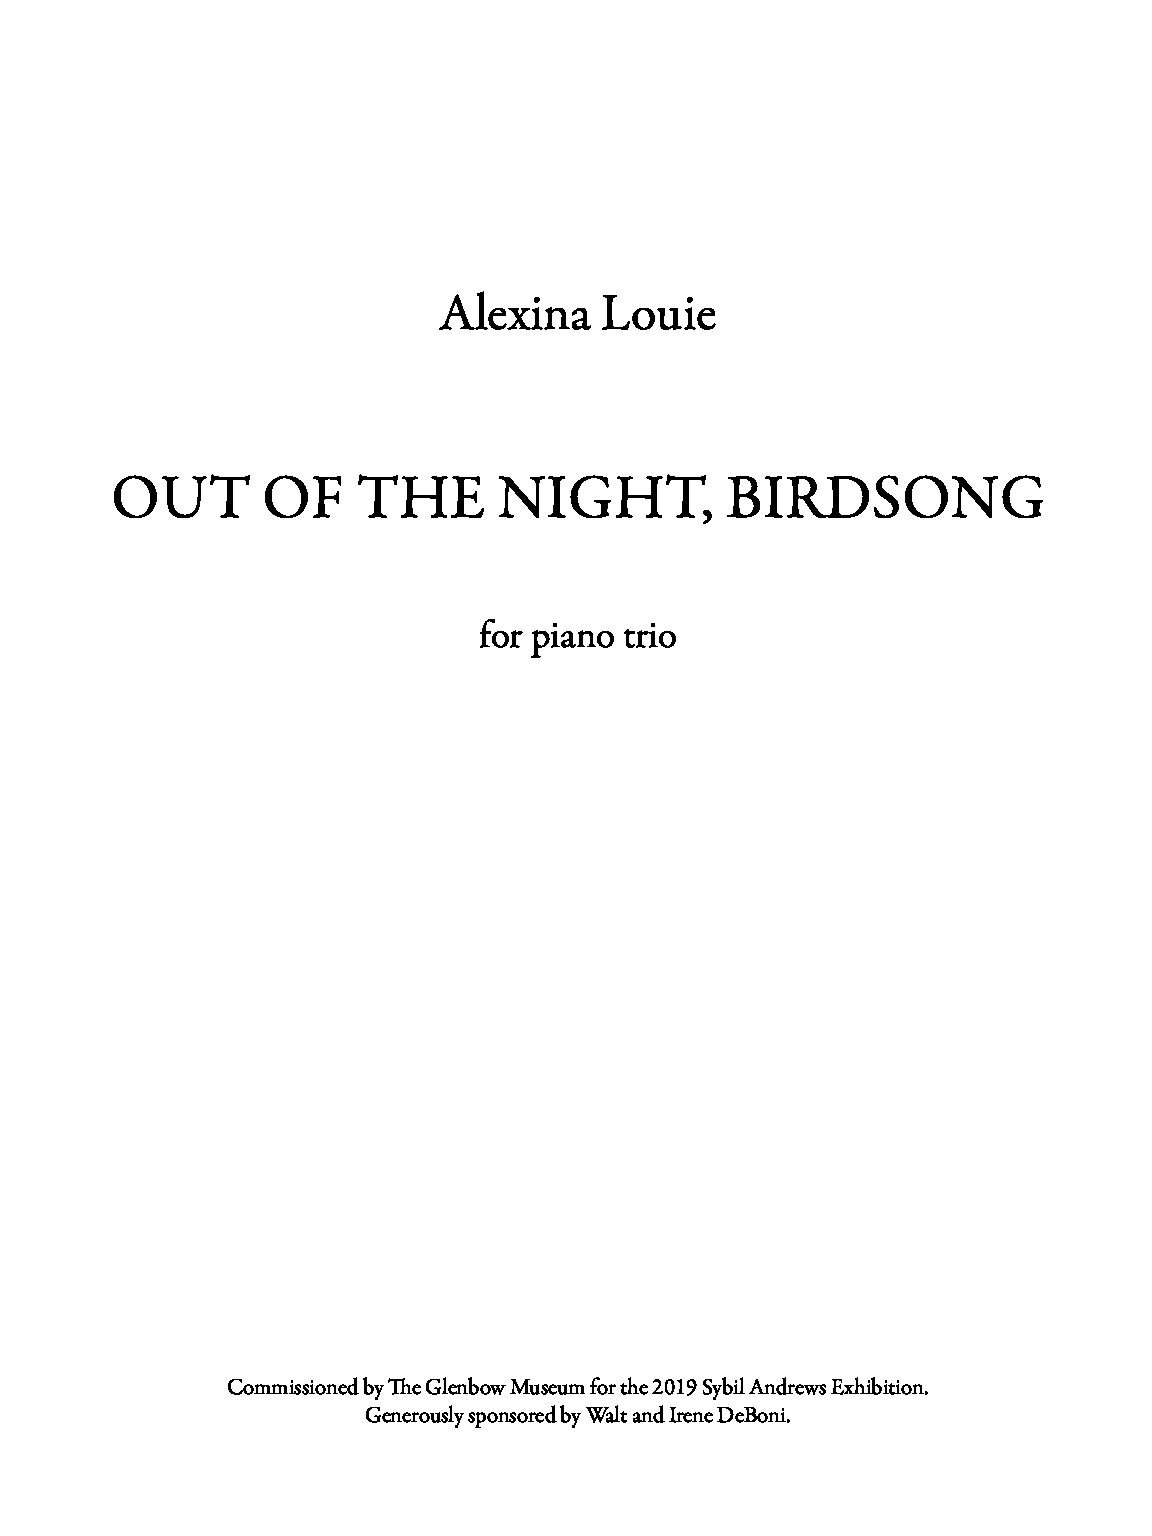 Alexina-Louie-Out-of-the-Night-Birdsong-score-6p